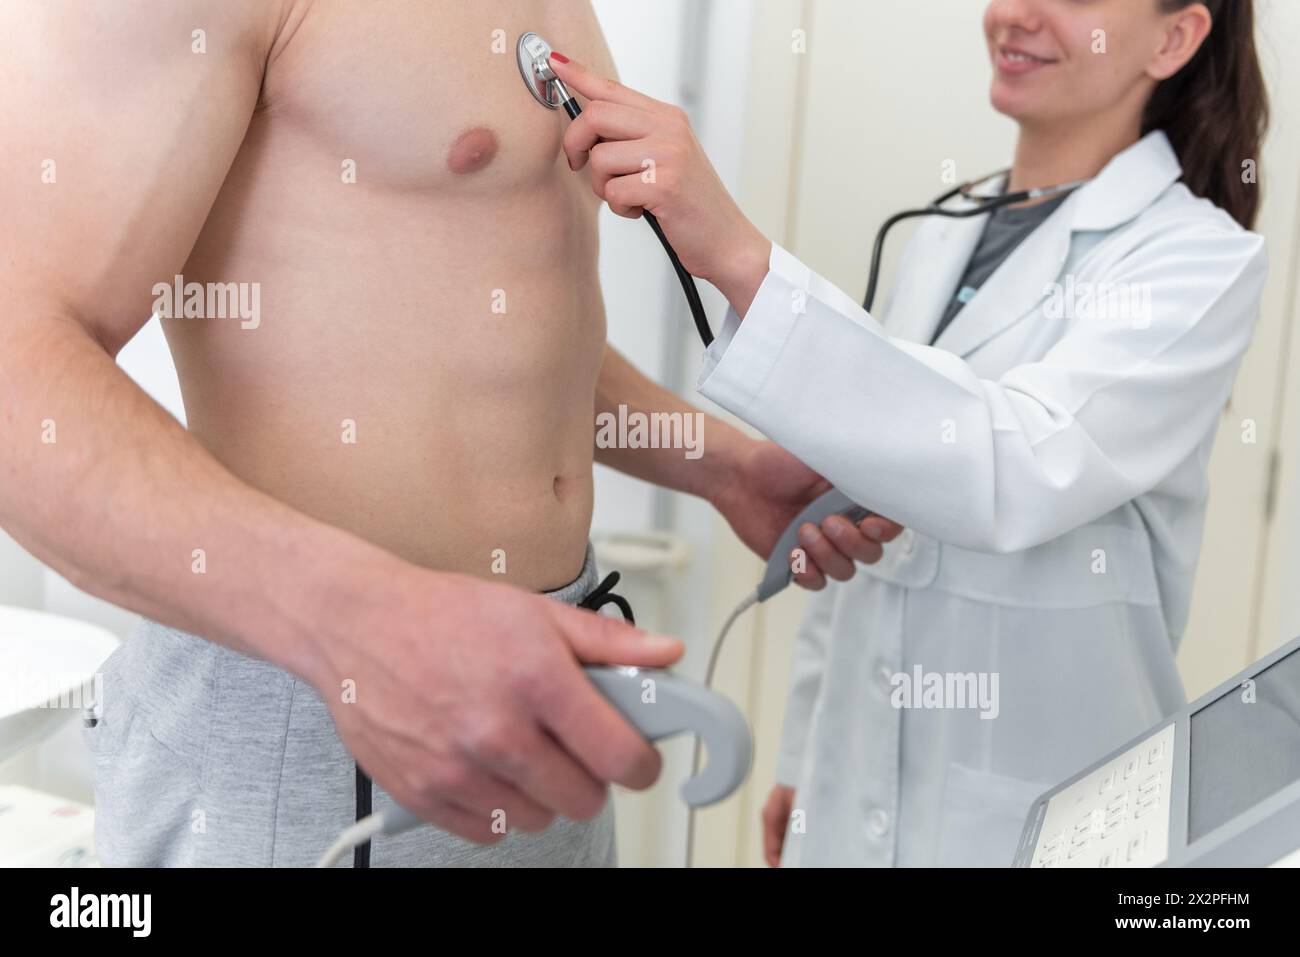 A smiling doctor is using a stethoscope to listen to a patients chest in a medical clinic. Stock Photo